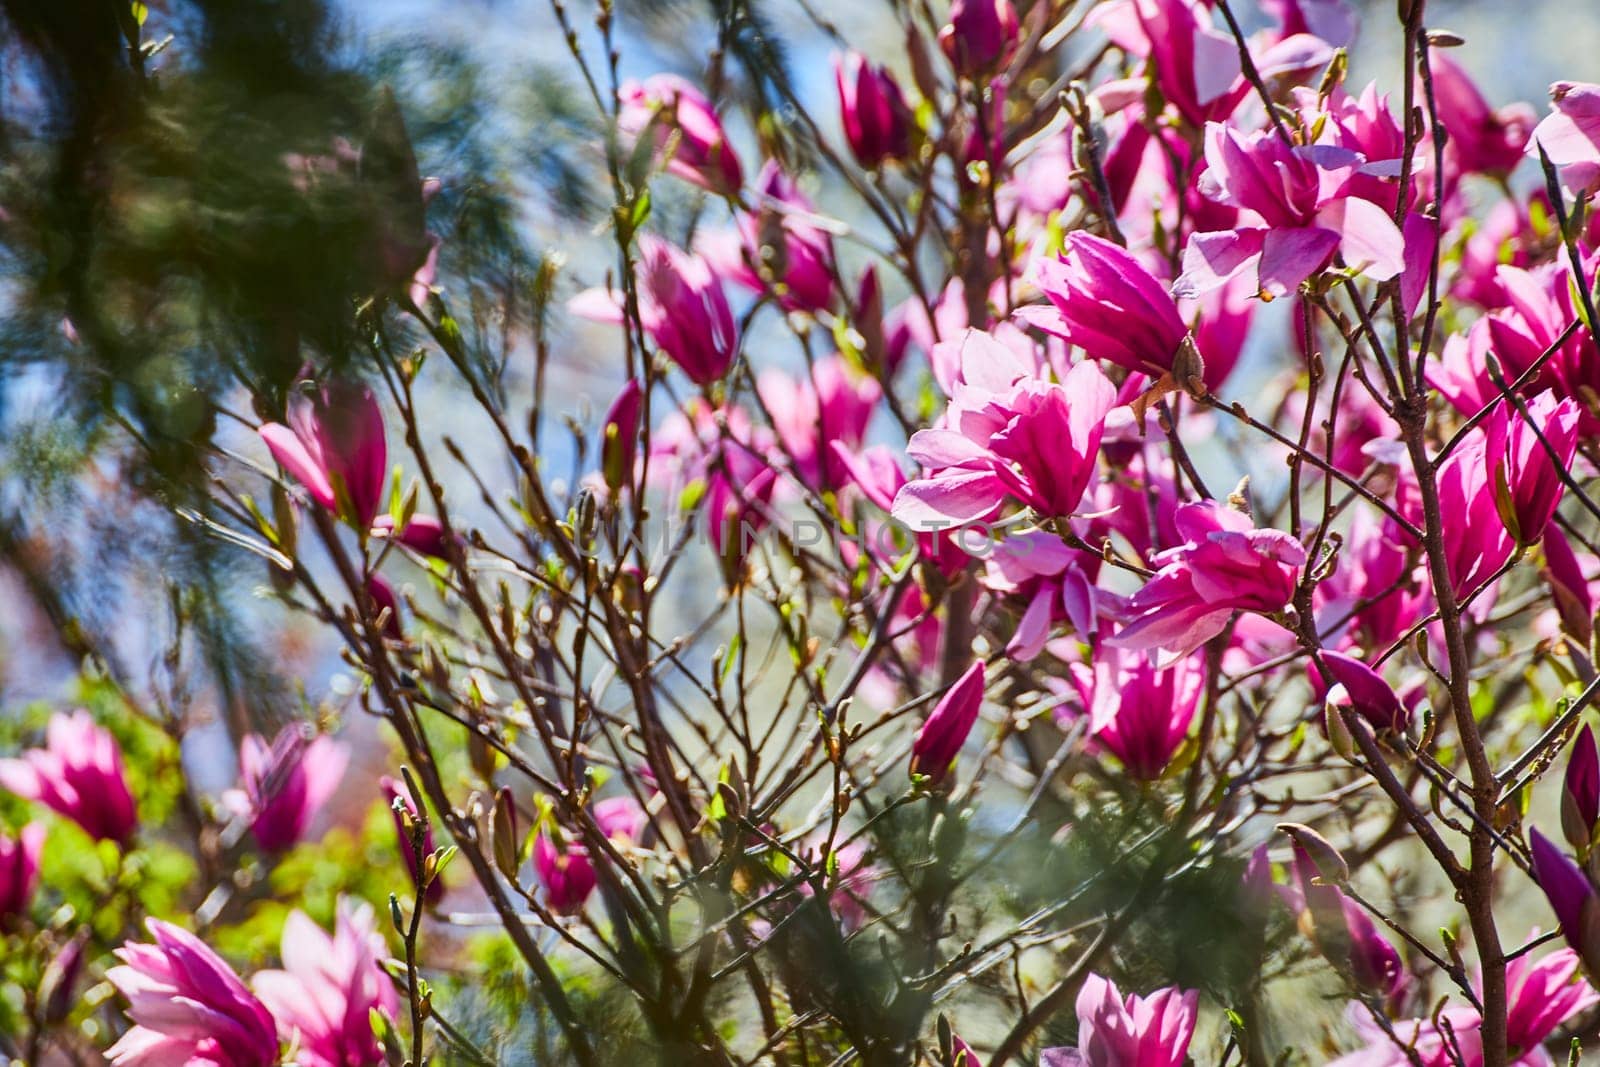 Springtime in Fort Wayne: Lush pink magnolia blooms glow under sunlight at the Children's Zoo.